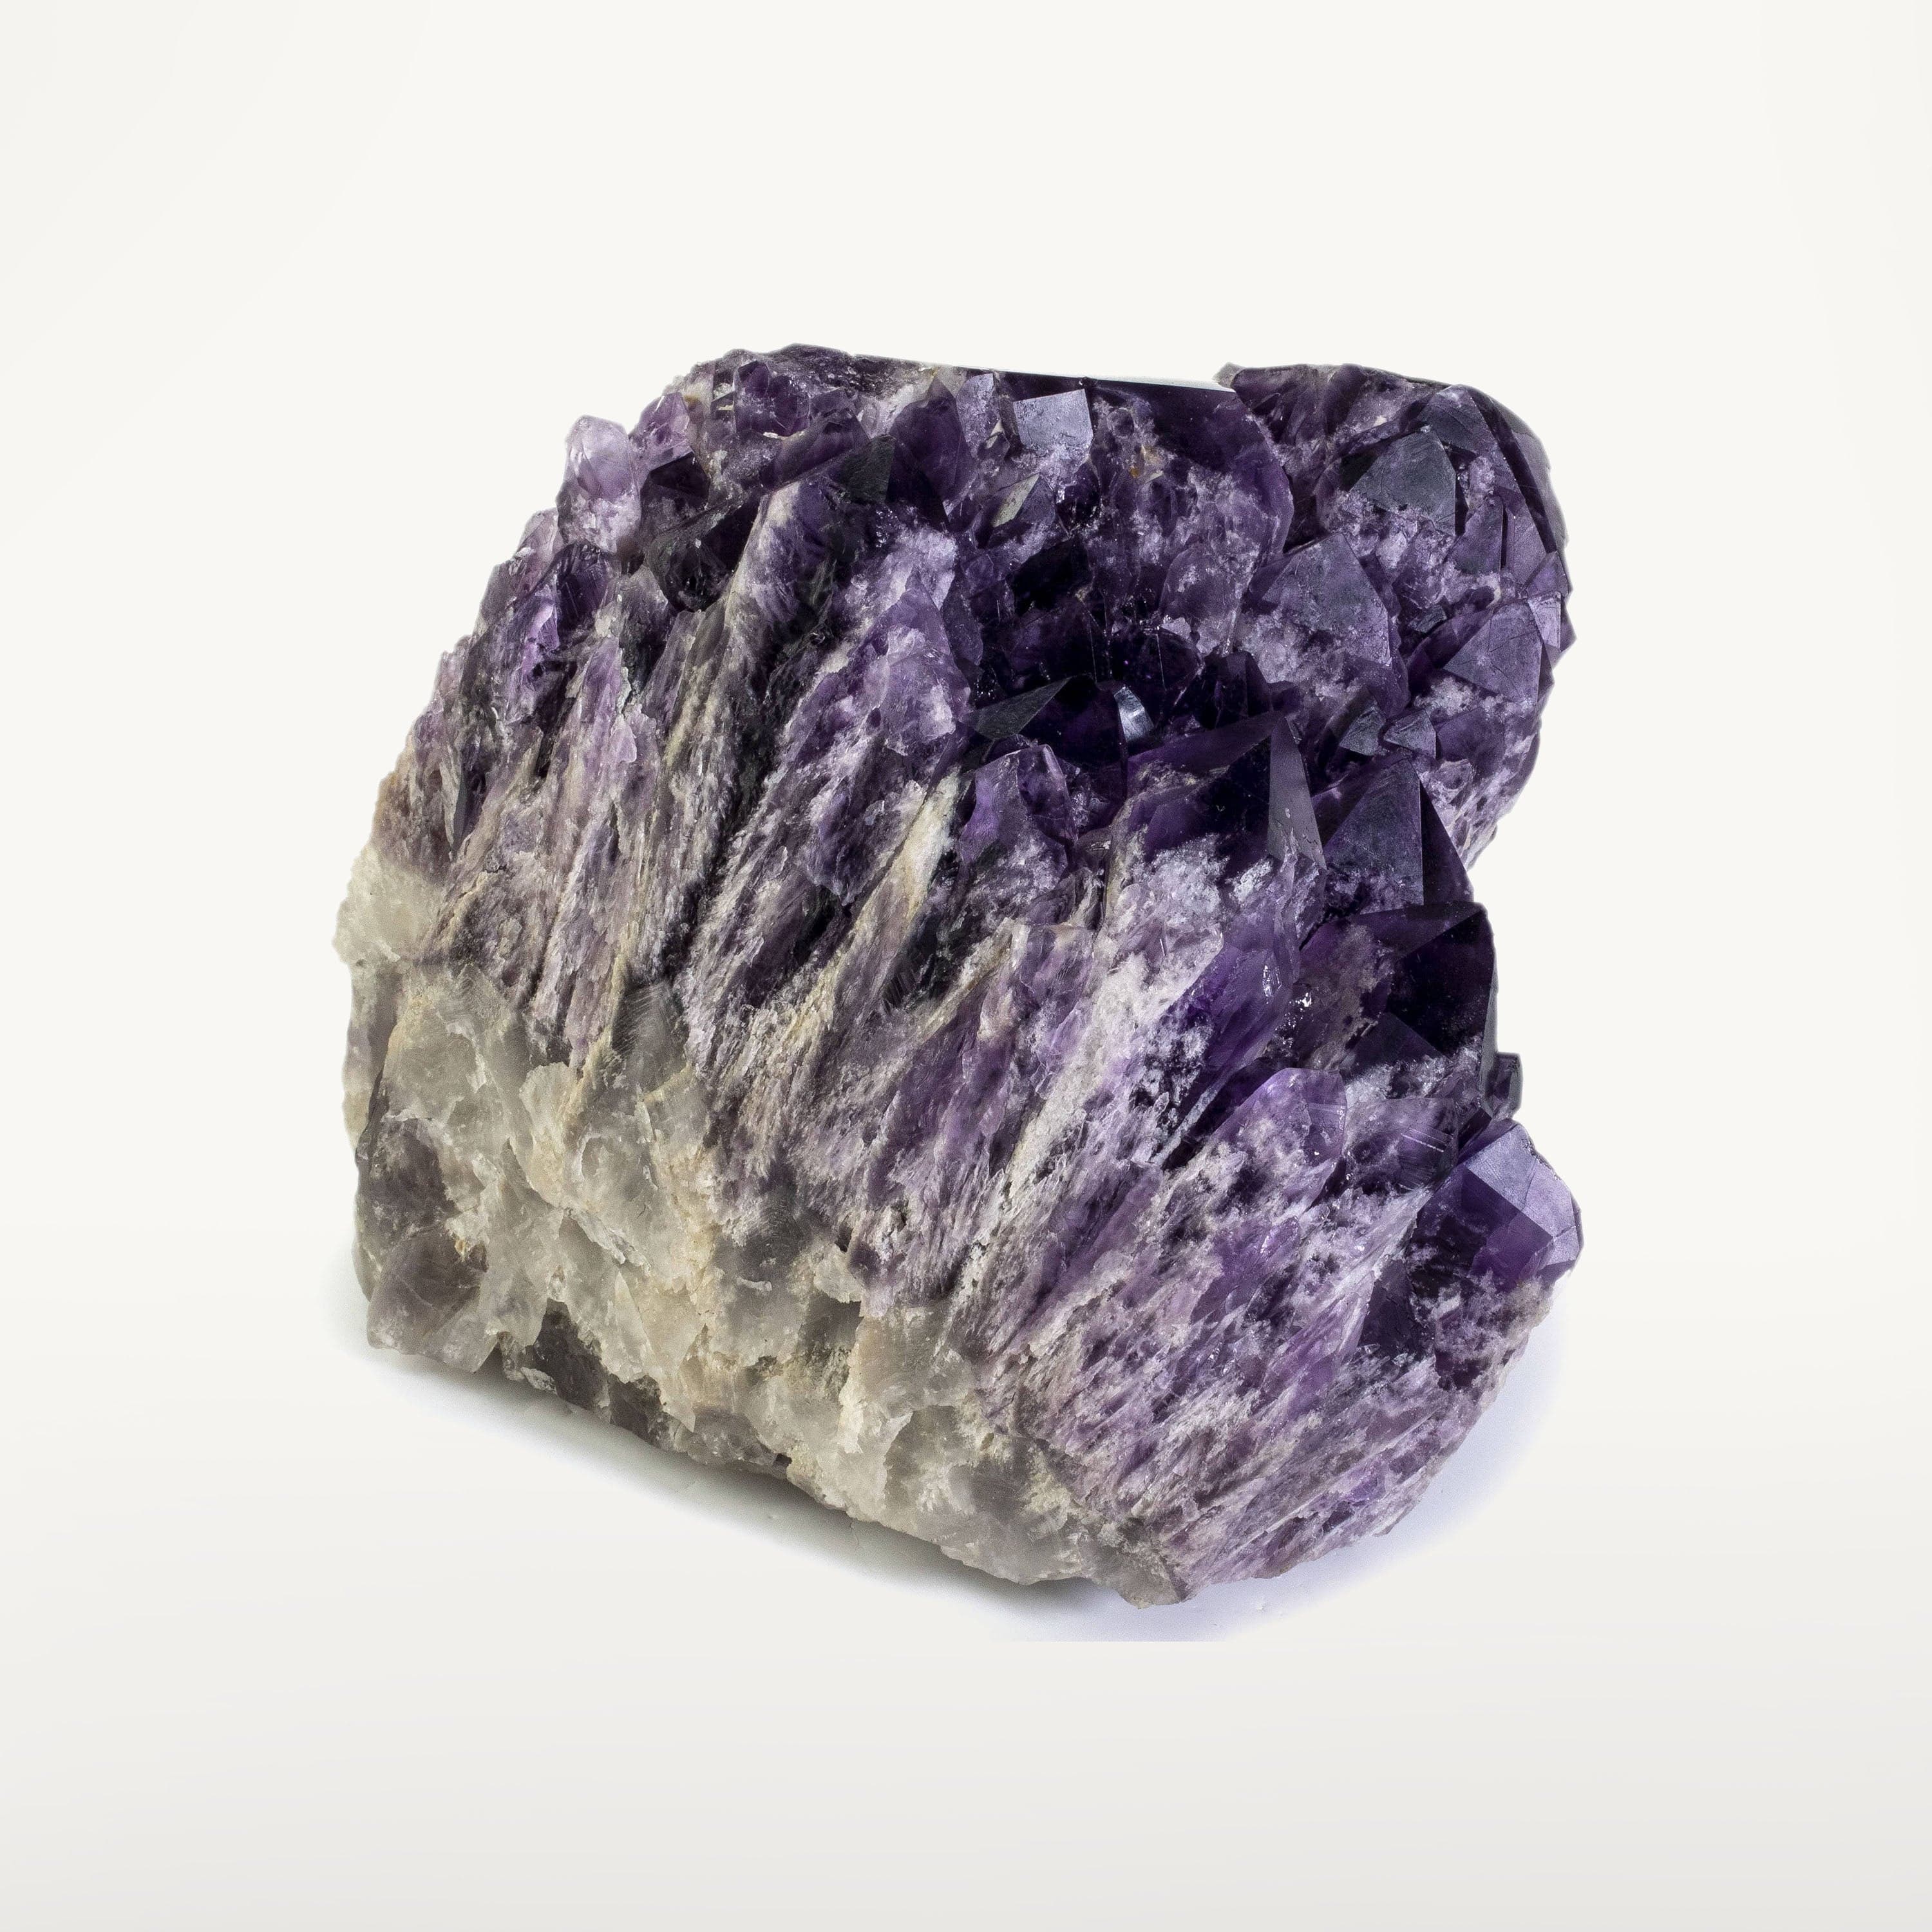 Kalifano Amethyst Rare Natural Elestial Amethyst Cluster Point from Brazil - 11.2 lbs ALW2000.001